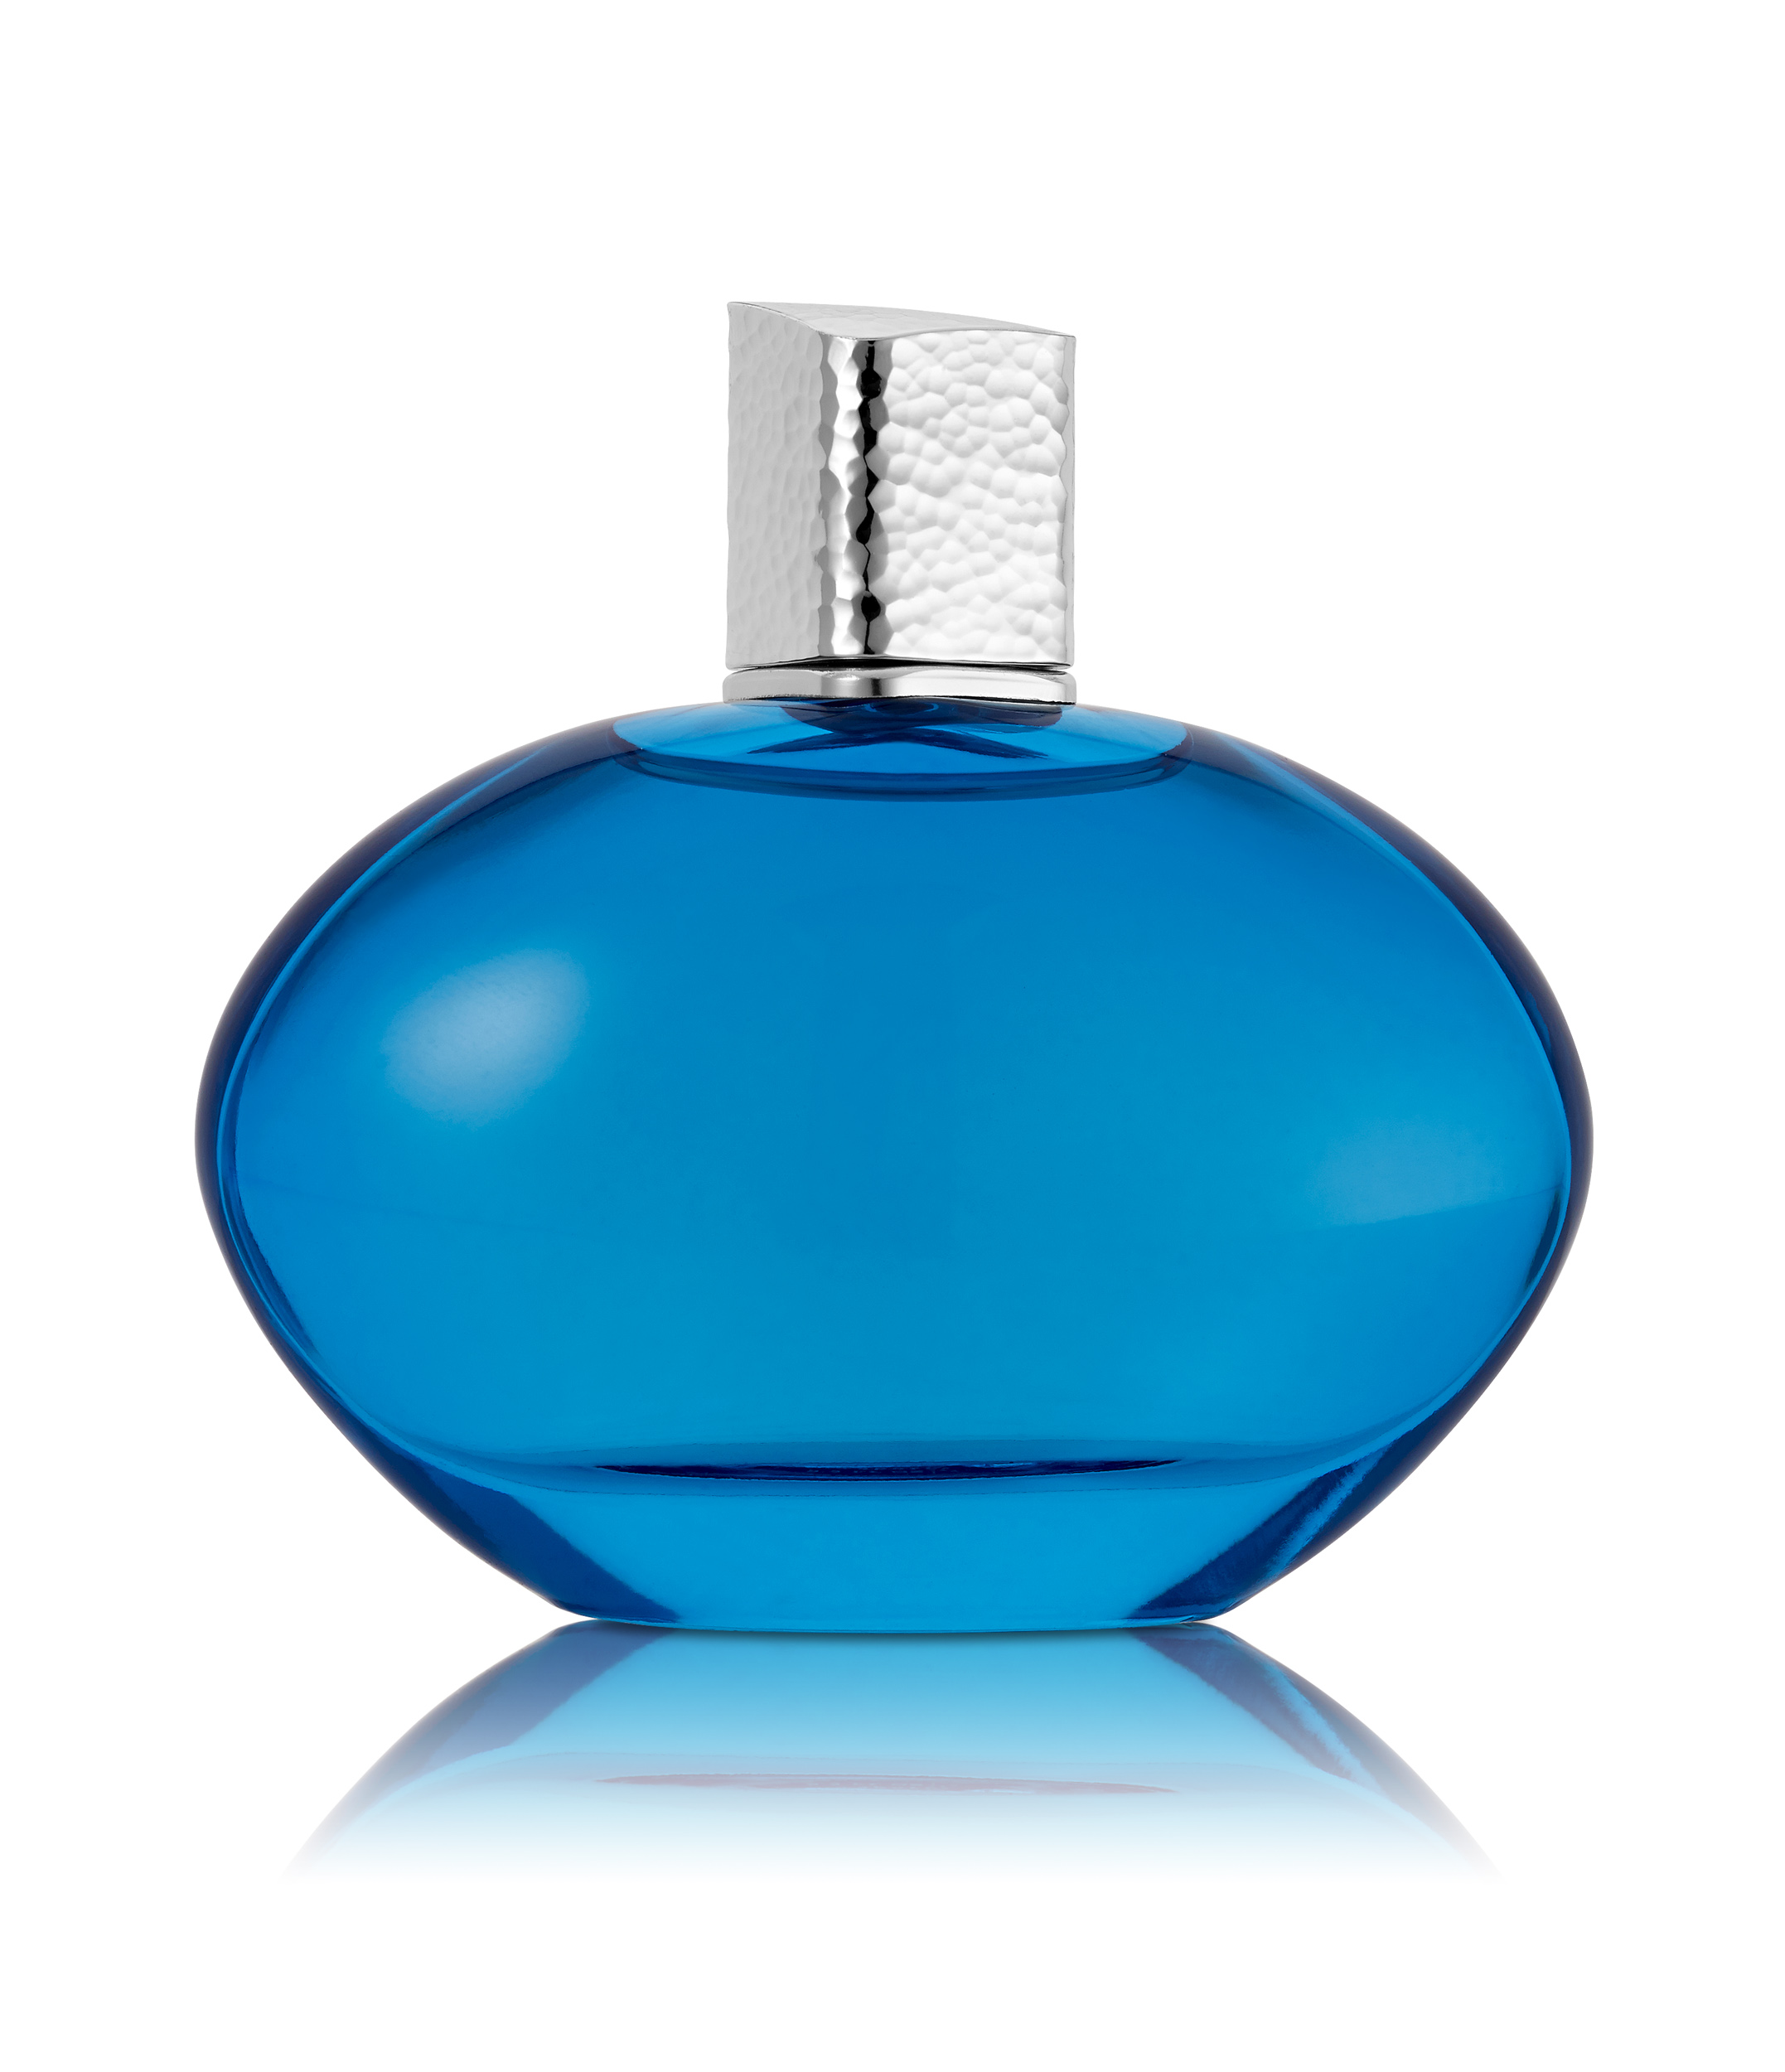 an e-commerce photograph of an oval blue bottle of perfume with hammered silver cap with reflection on white